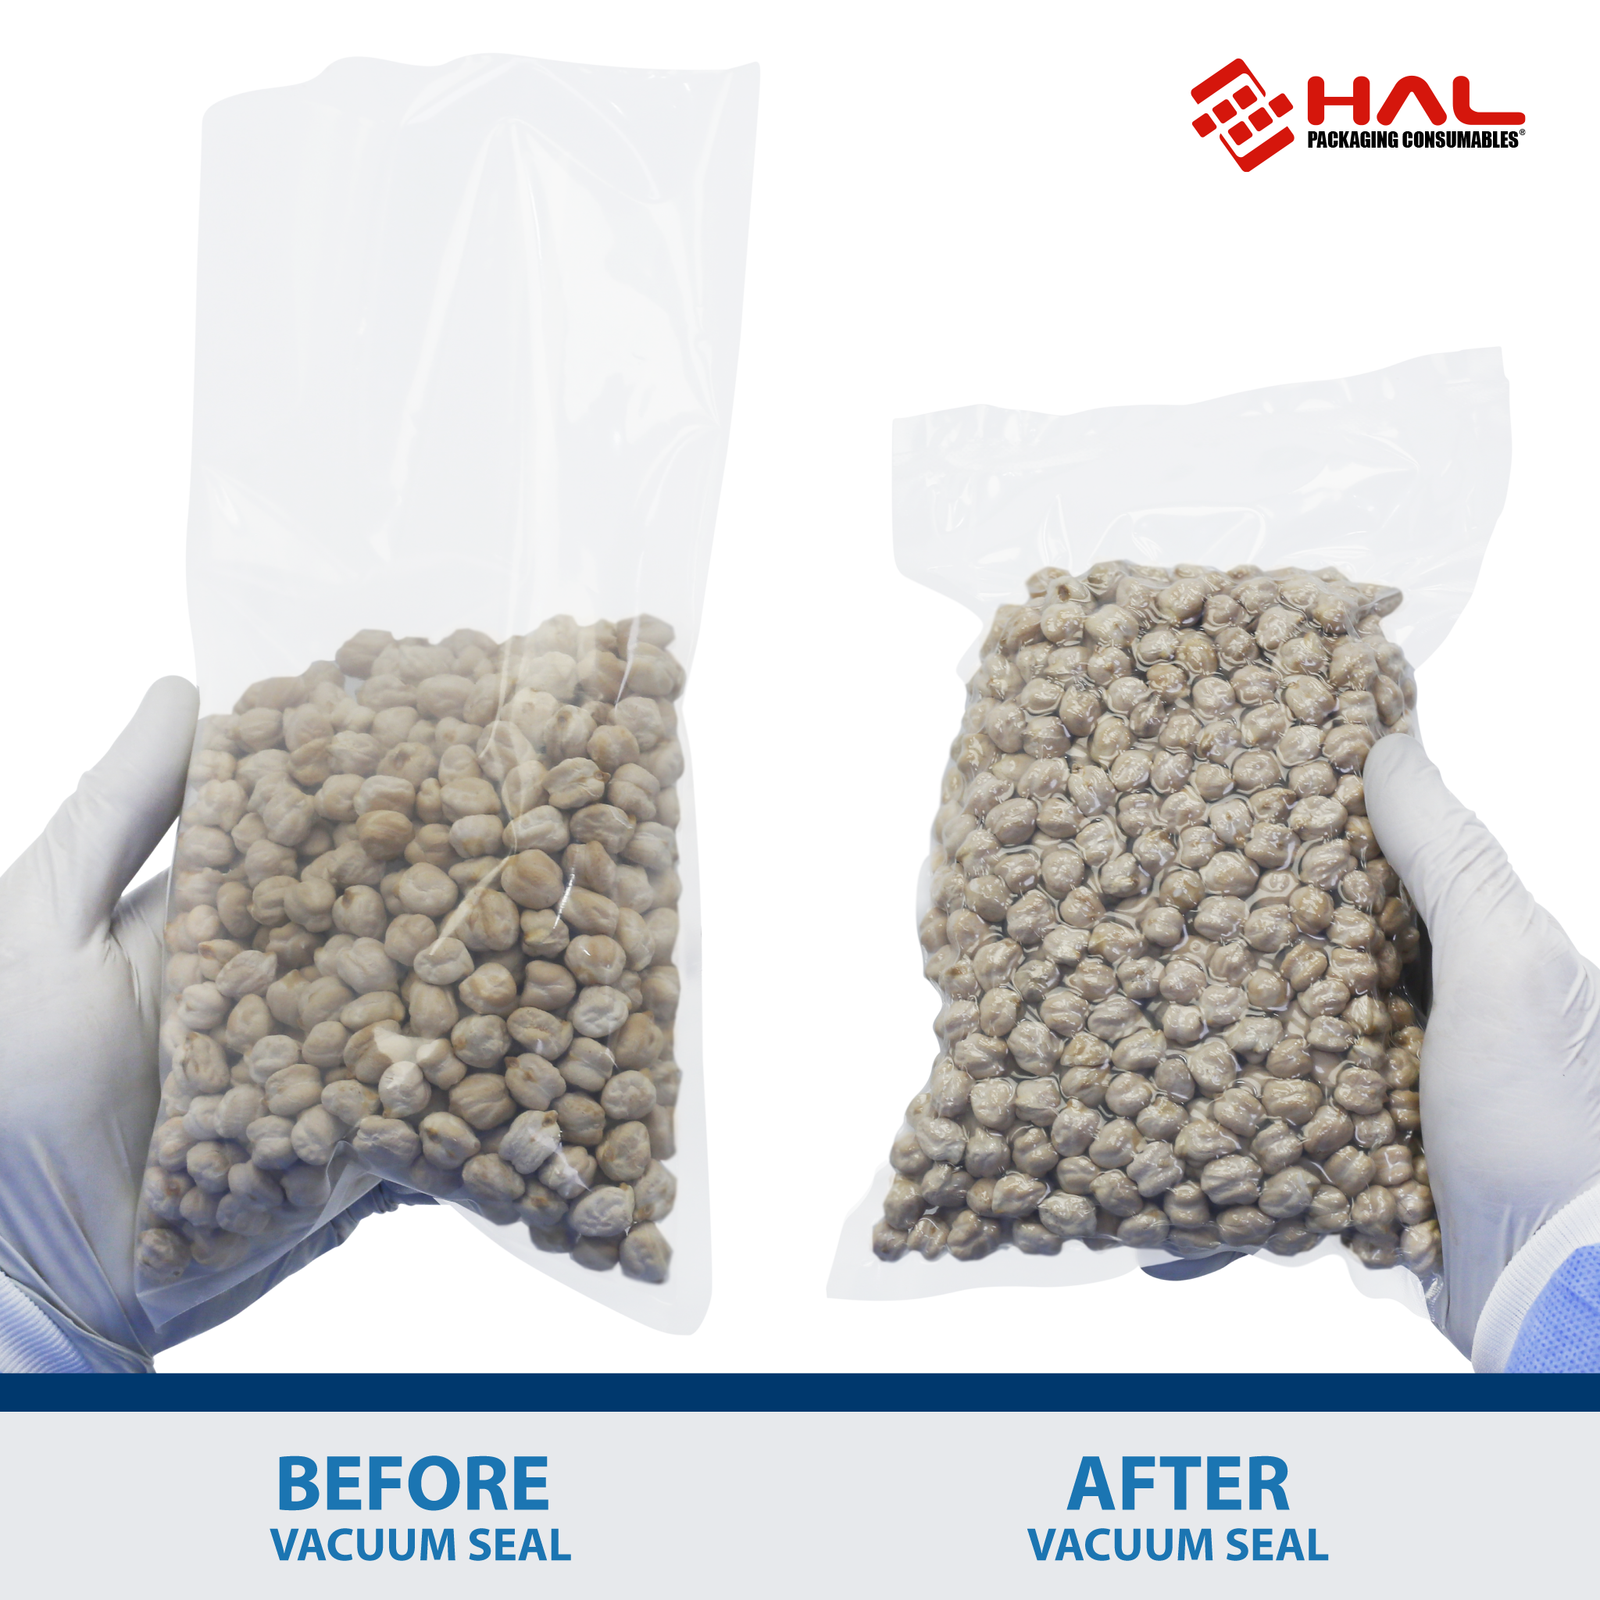 Hands of a person showing the before and after of one HAL bag unsealed with chickpeas inside and then the same bag vacuumed sealed side by side